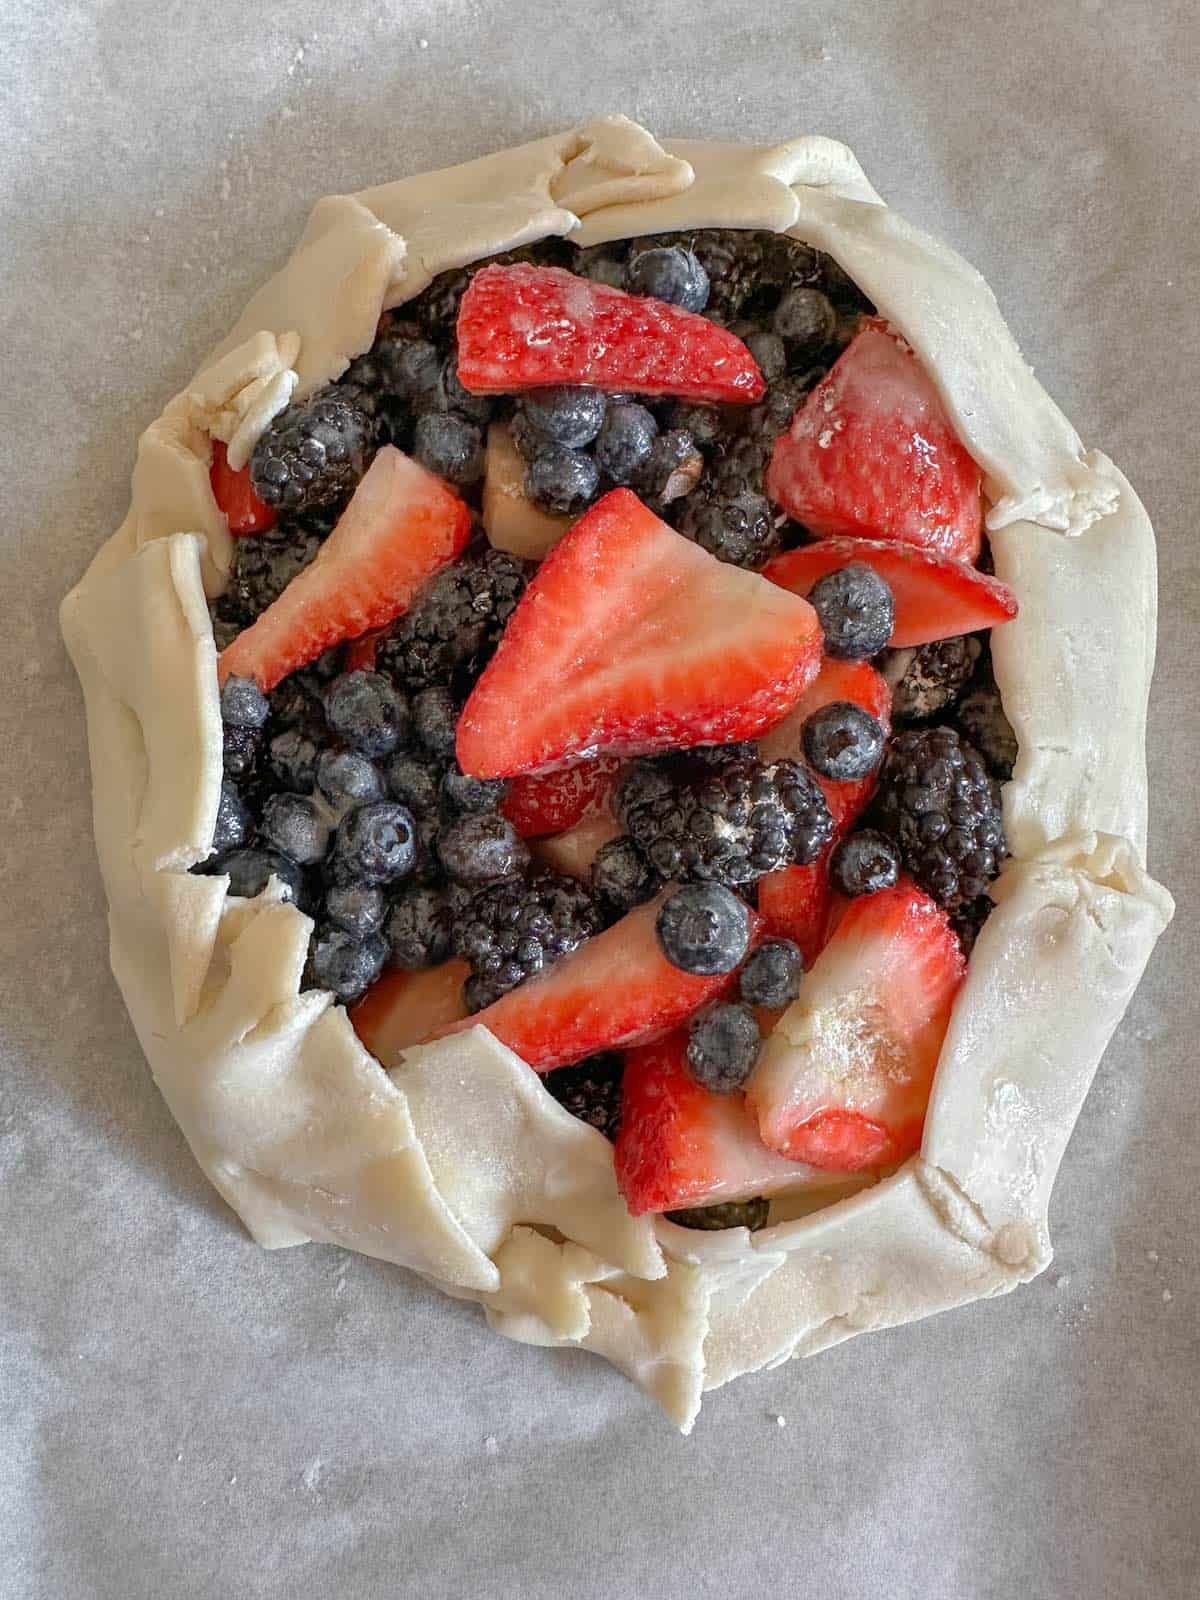 Berries enclosed in an uncooked pie crust.